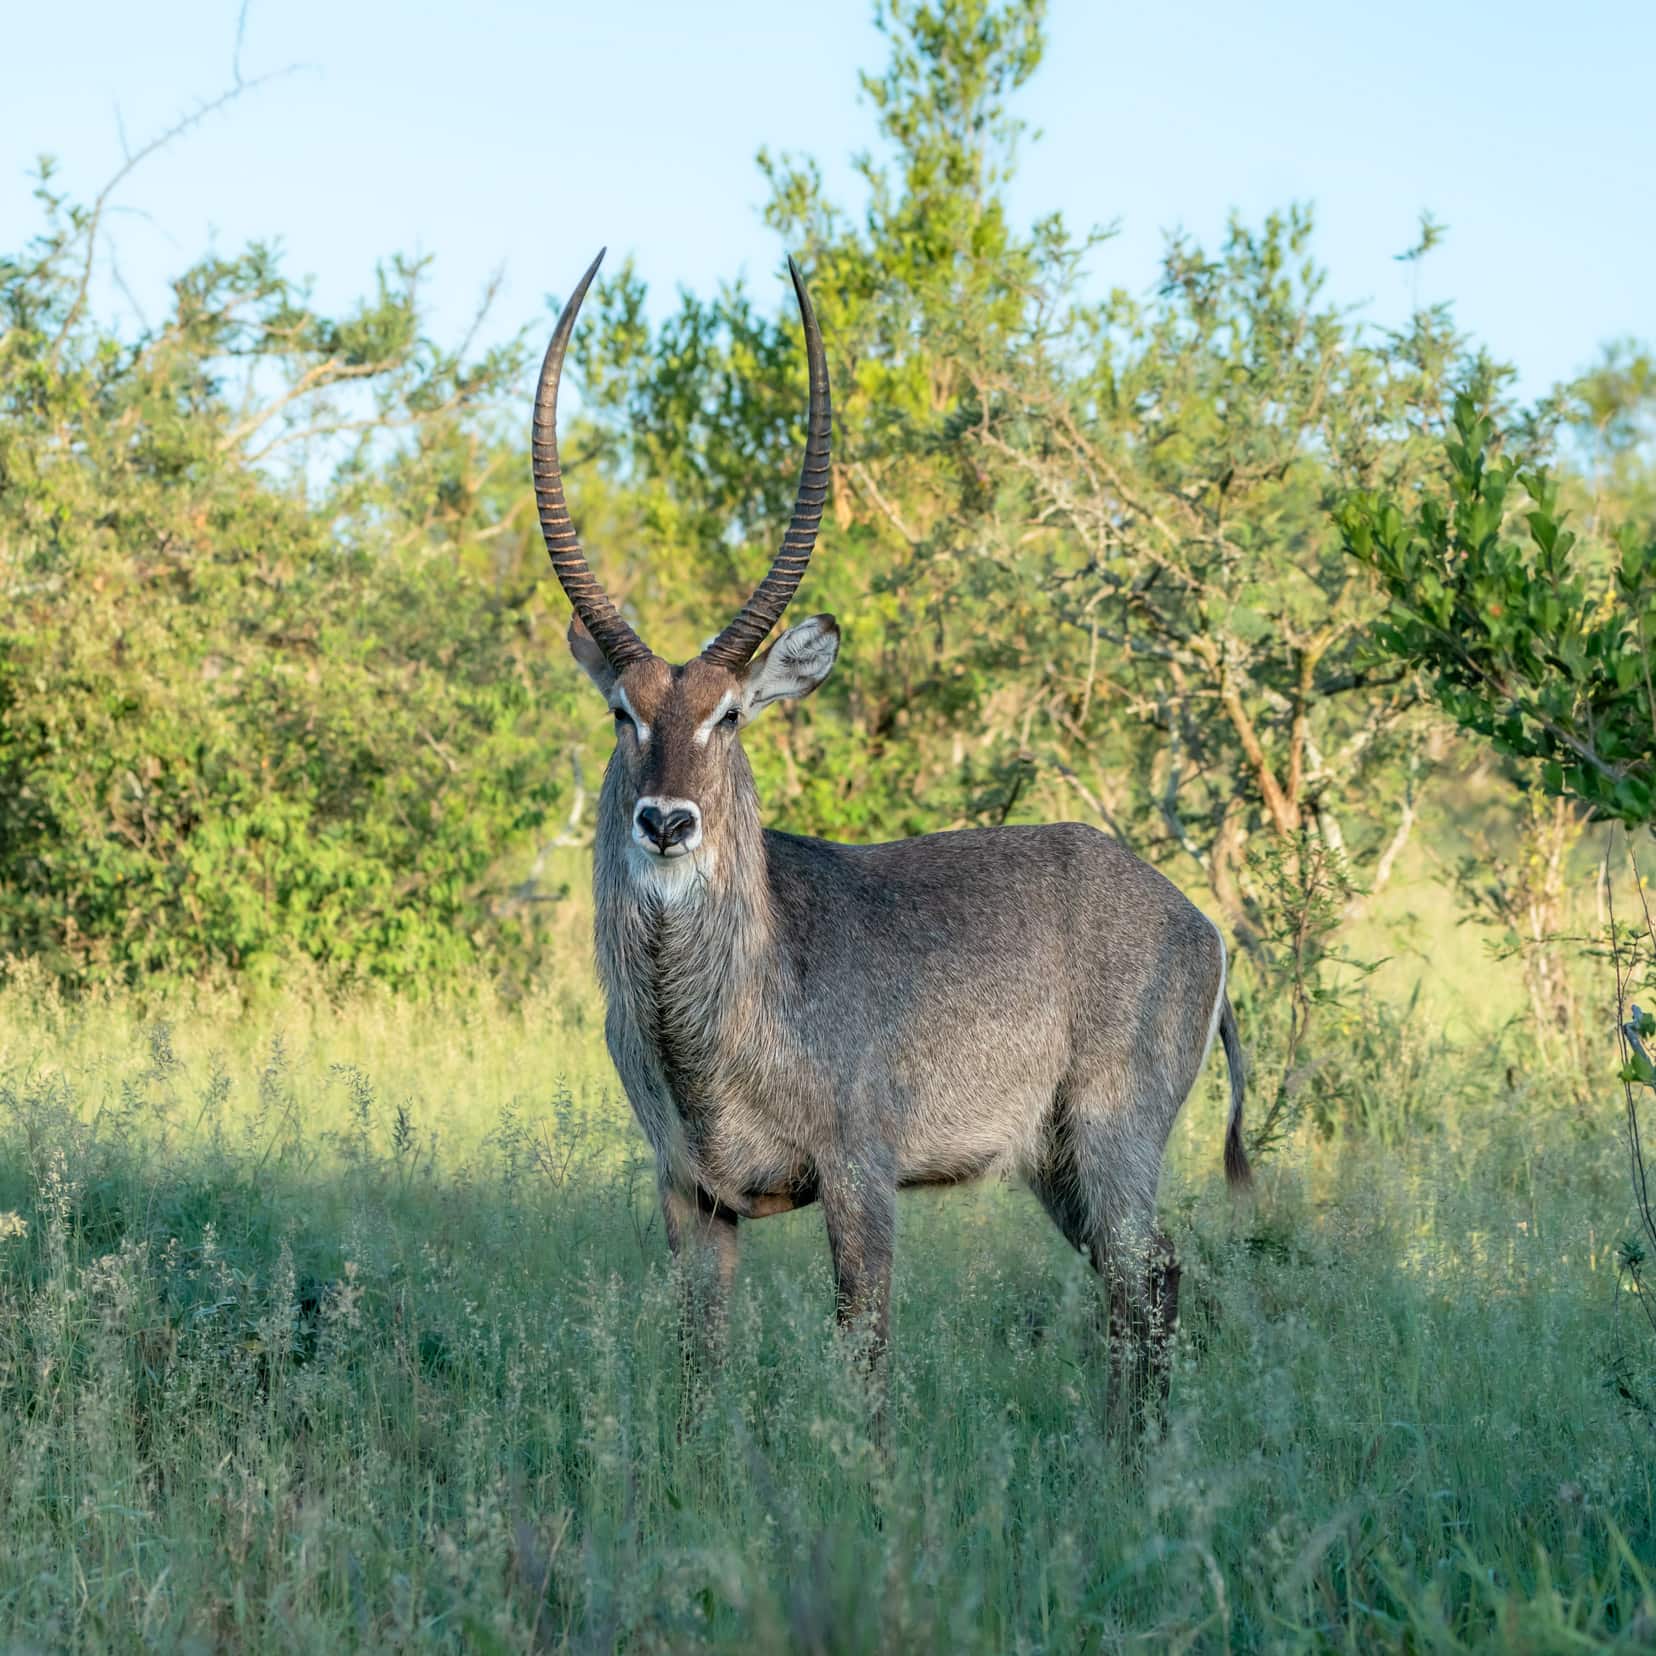 Waterbuck male with long horns in long grass in Kruger